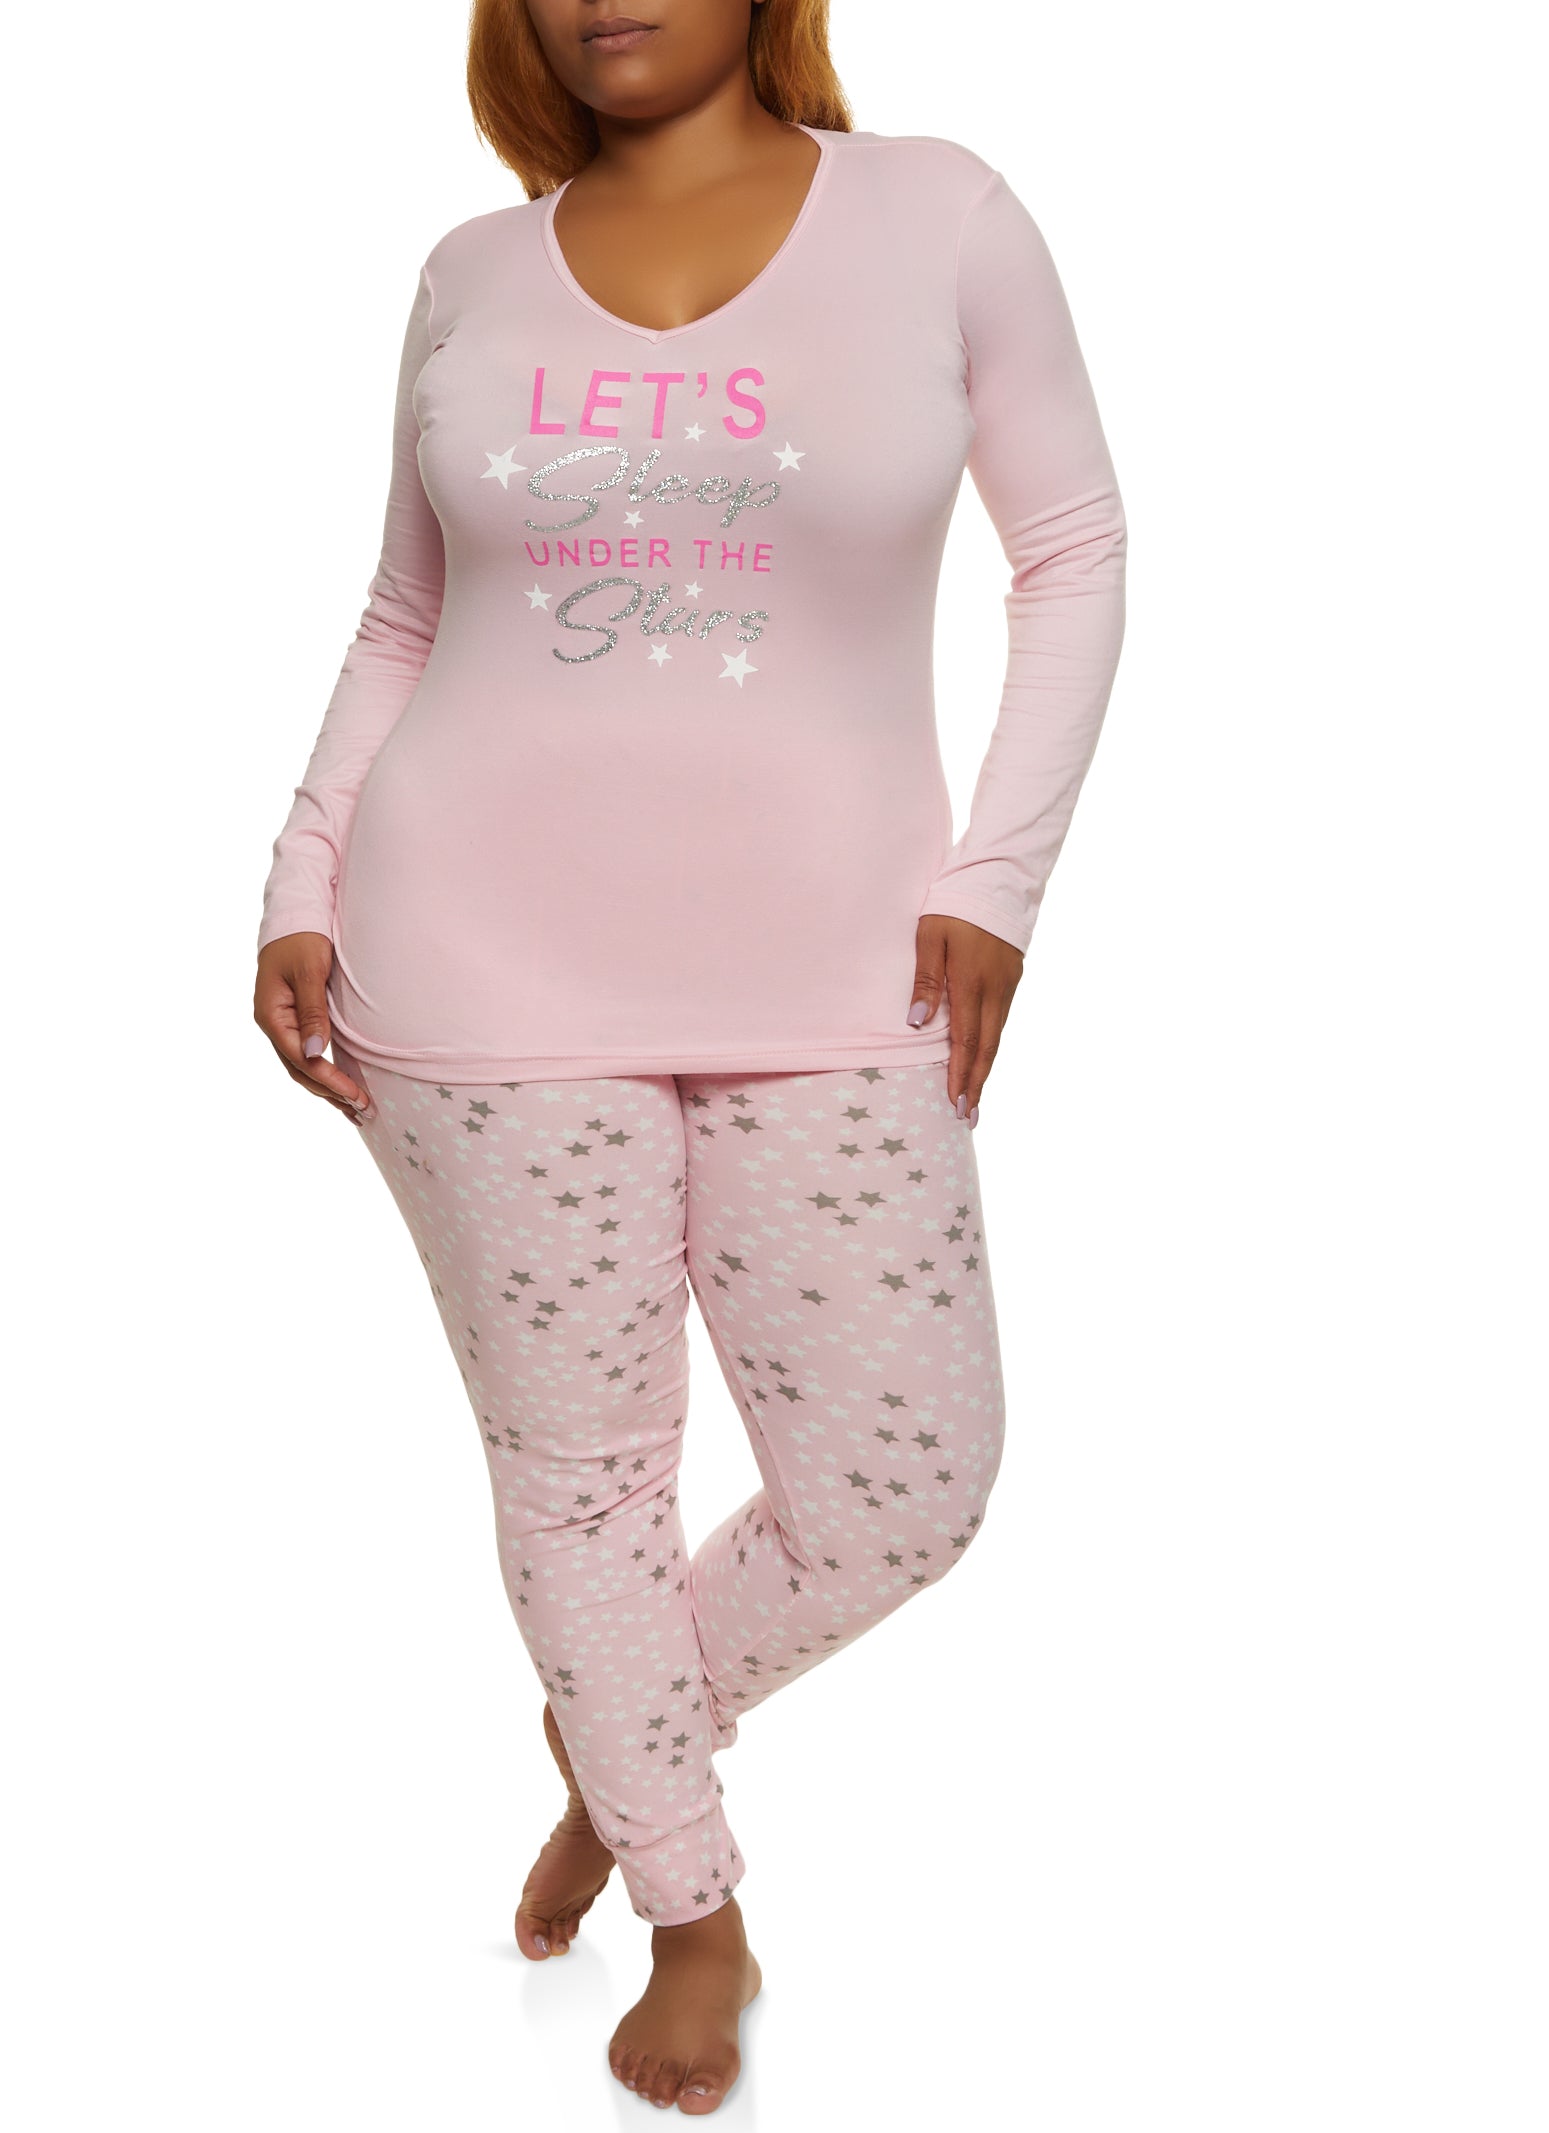 Women's Plus Size Crop Top and Stacked Leggings 2pc Set (White) IN